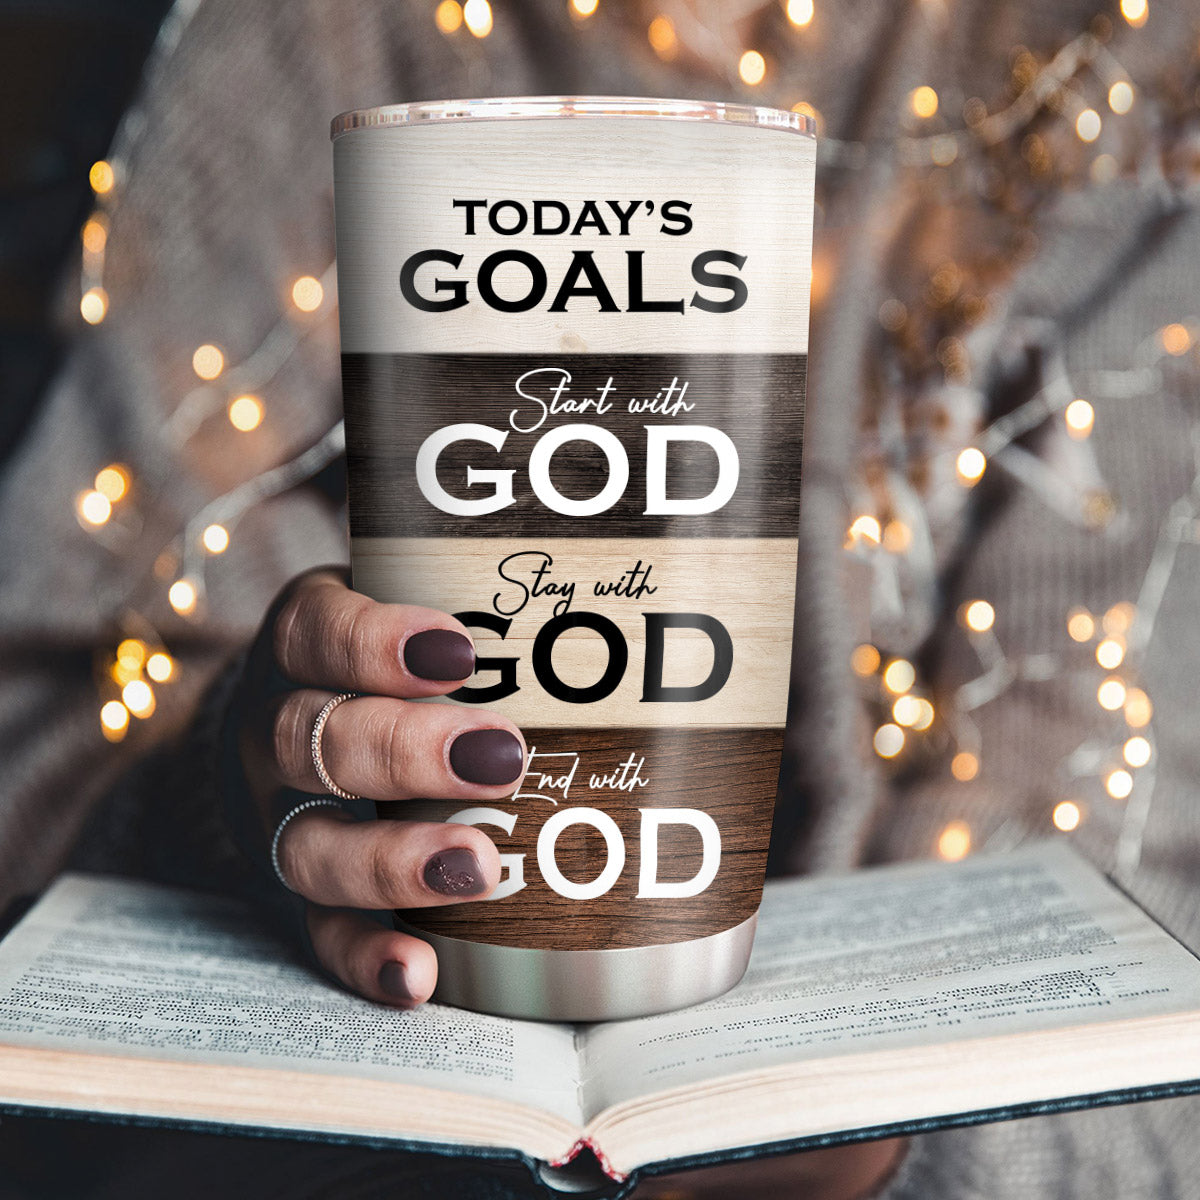 Classic Personalized Cross Stainless Steel Tumbler 20oz - Start The Day With God NUA162